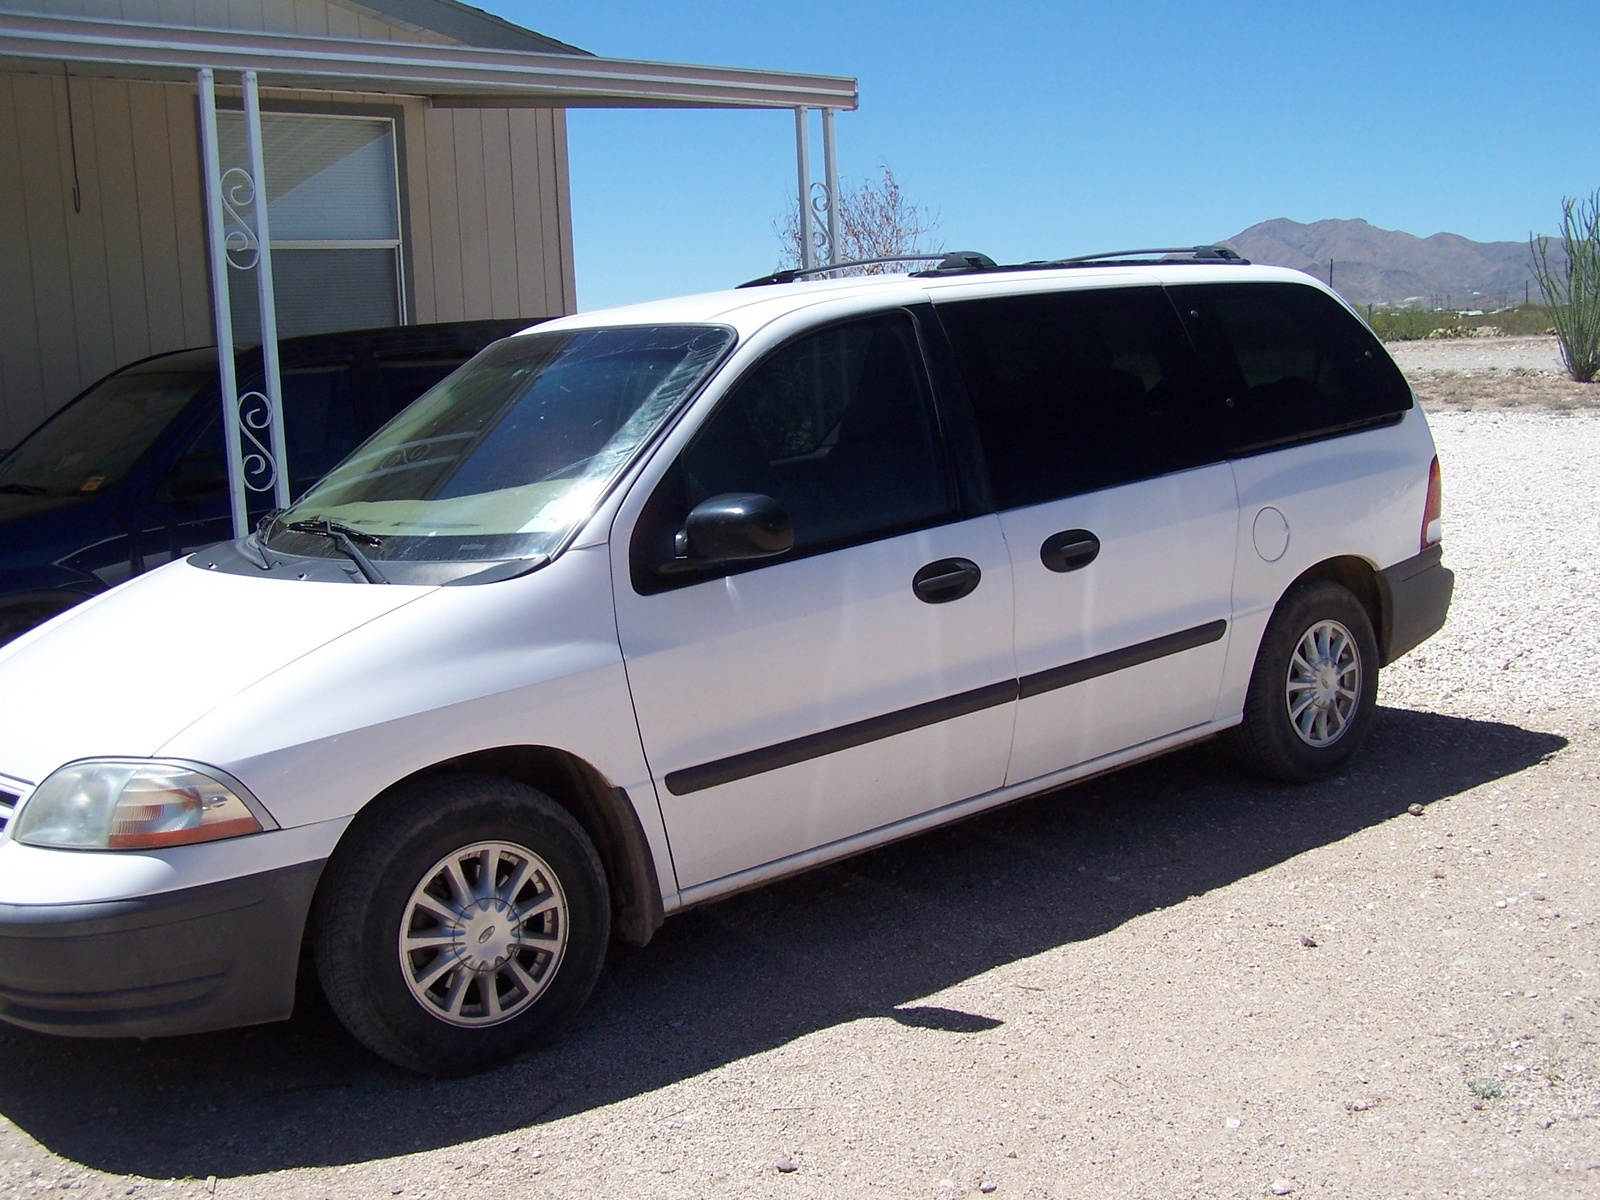 1995 Ford windstar ratings #2